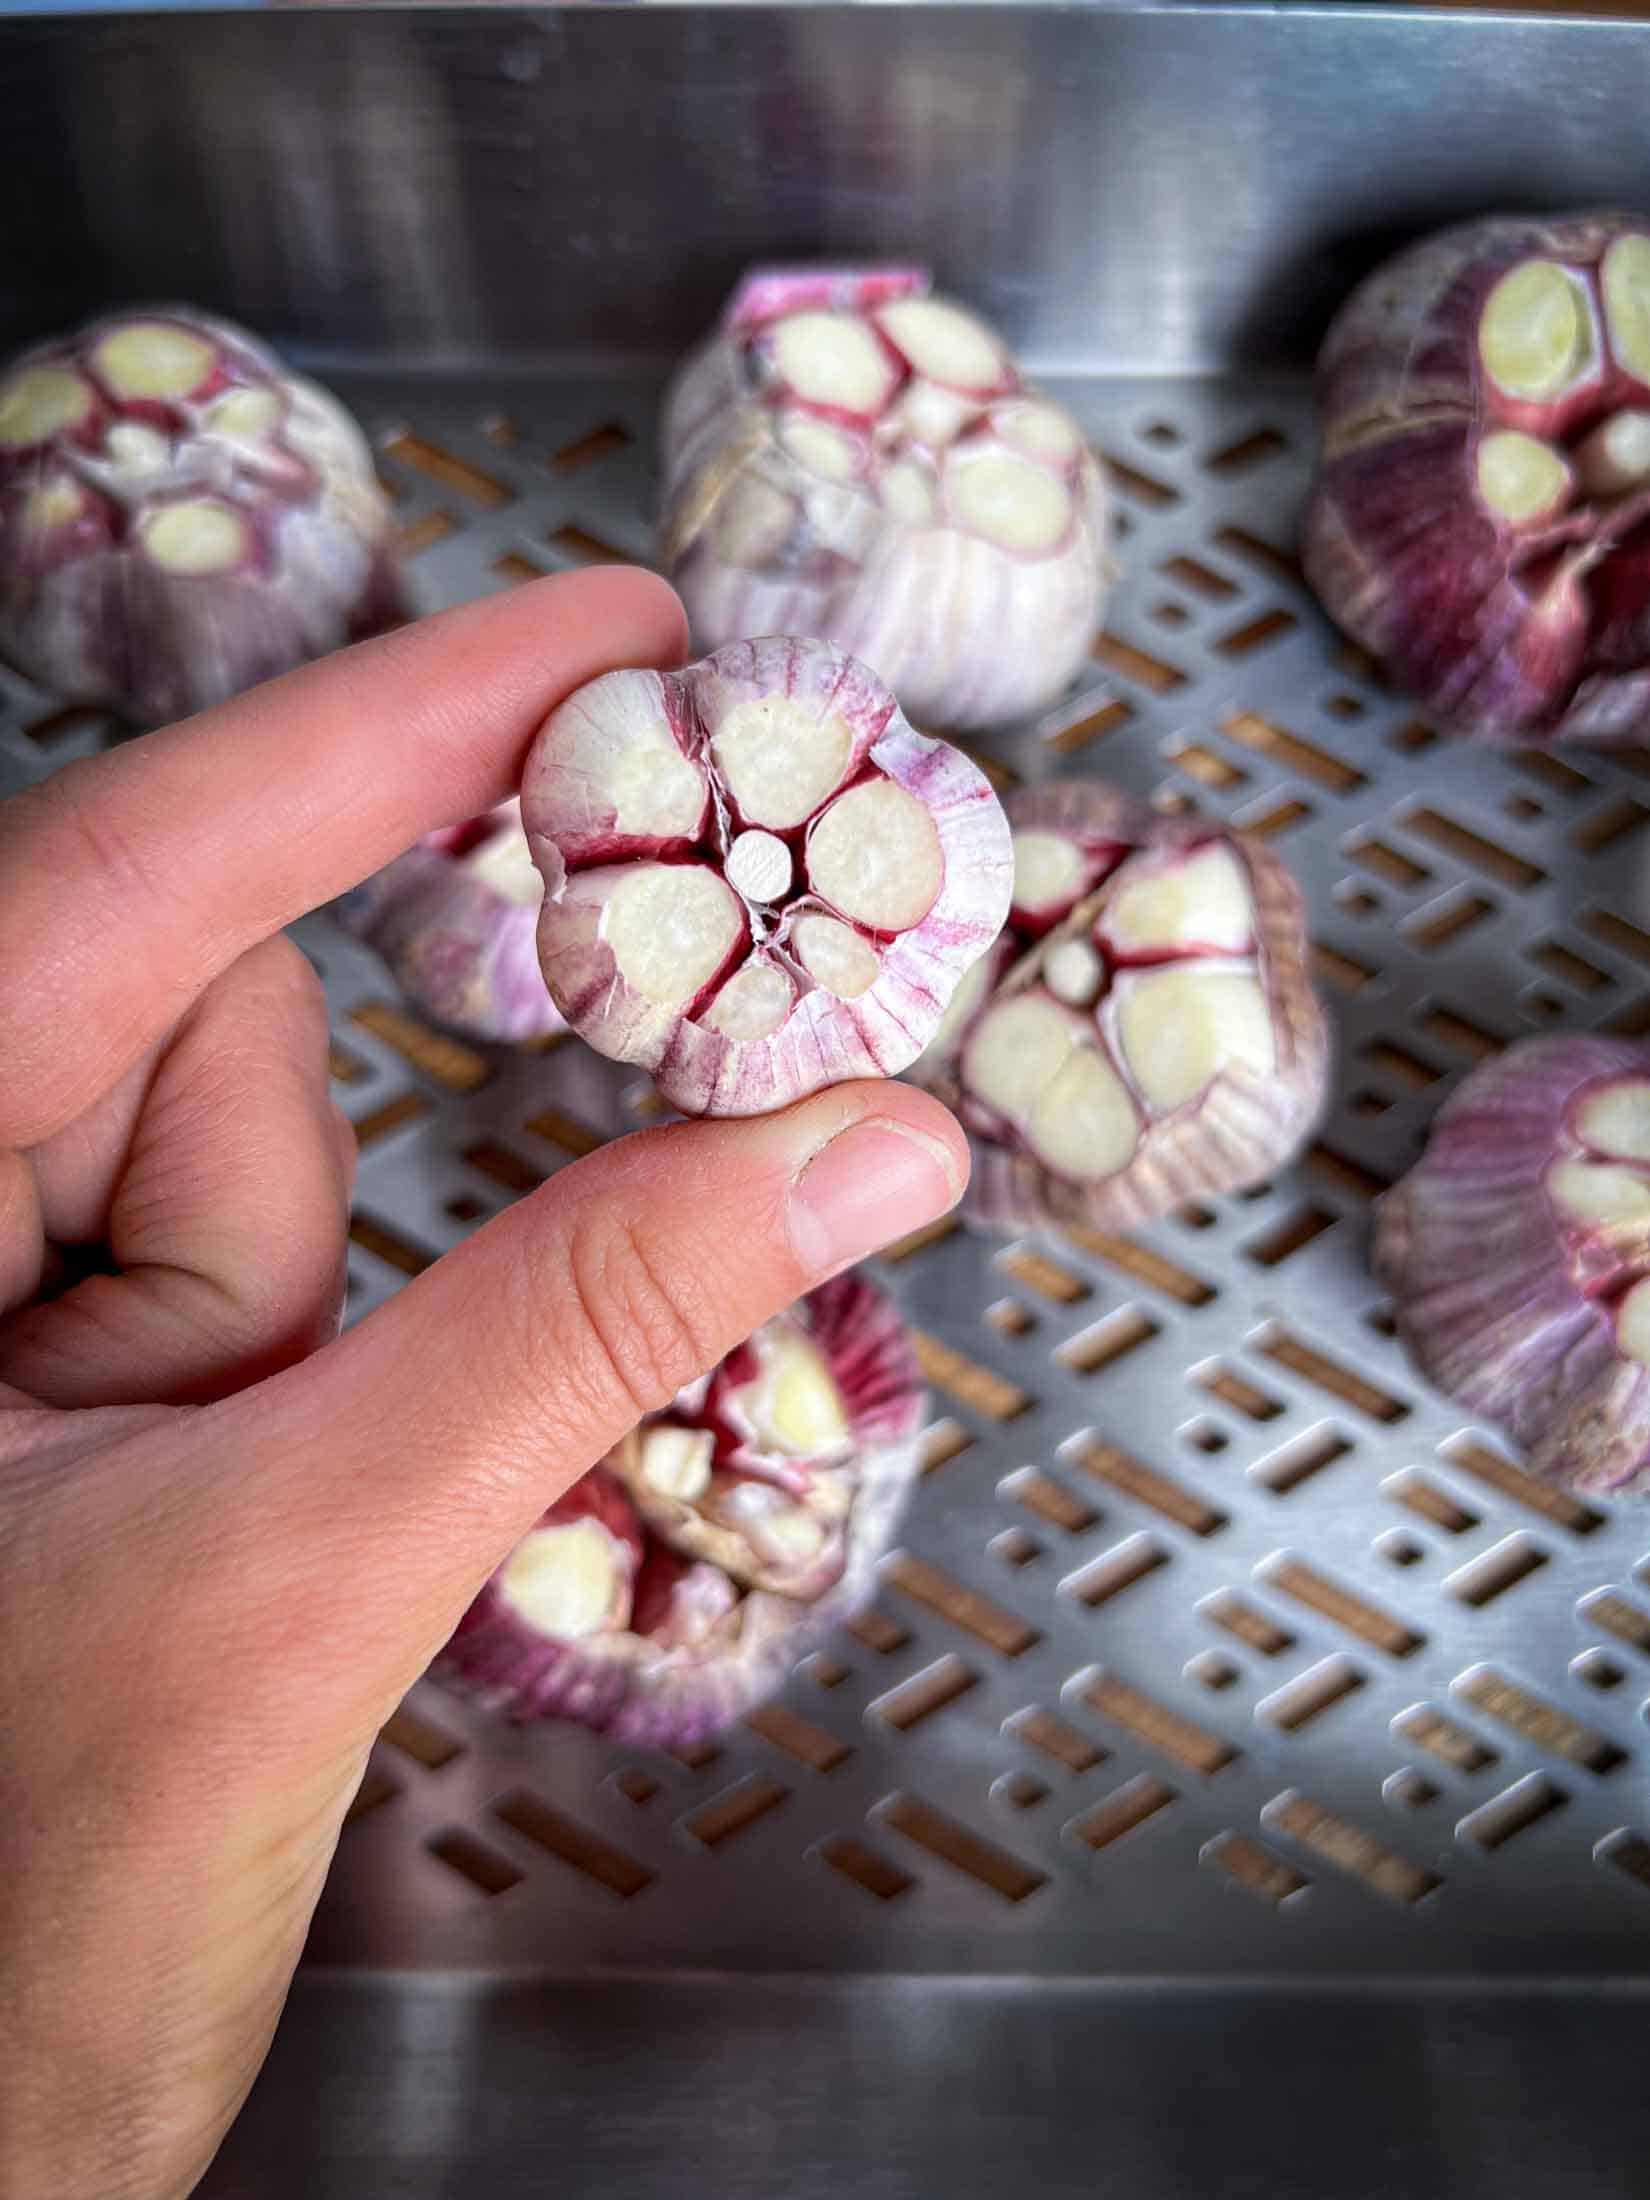 Holding up a small head of garlic with the top chopped off.